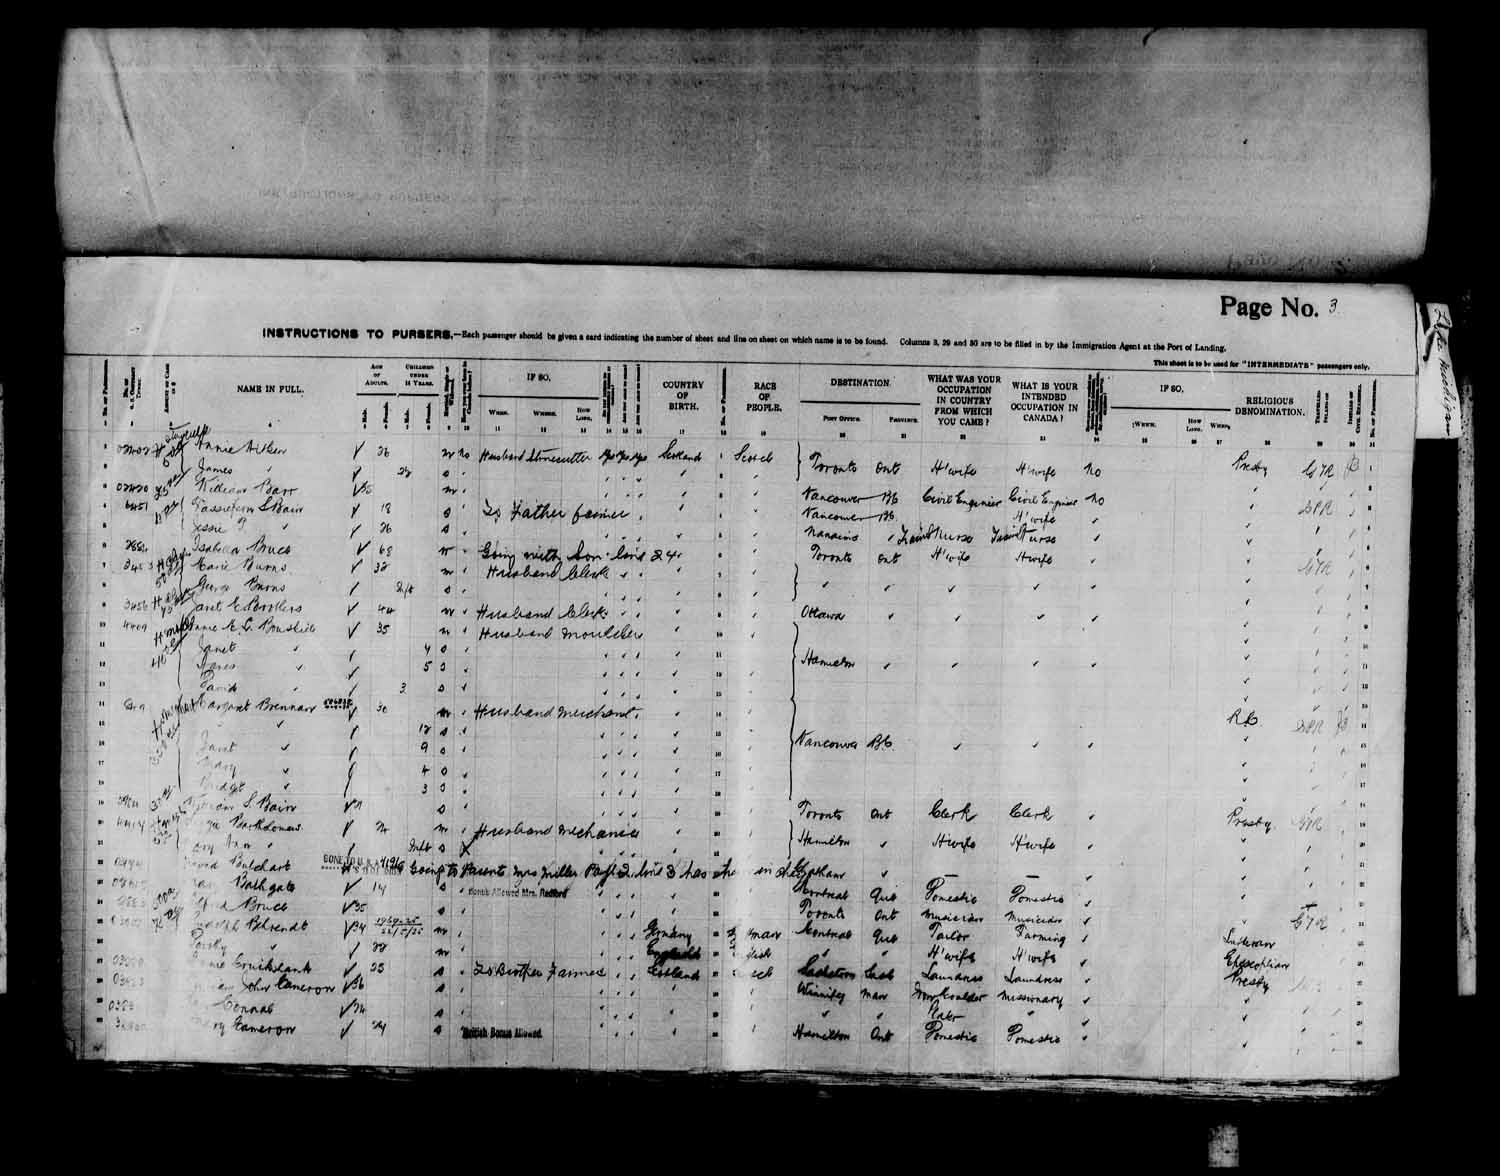 Digitized page of Passenger Lists for Image No.: e003566514